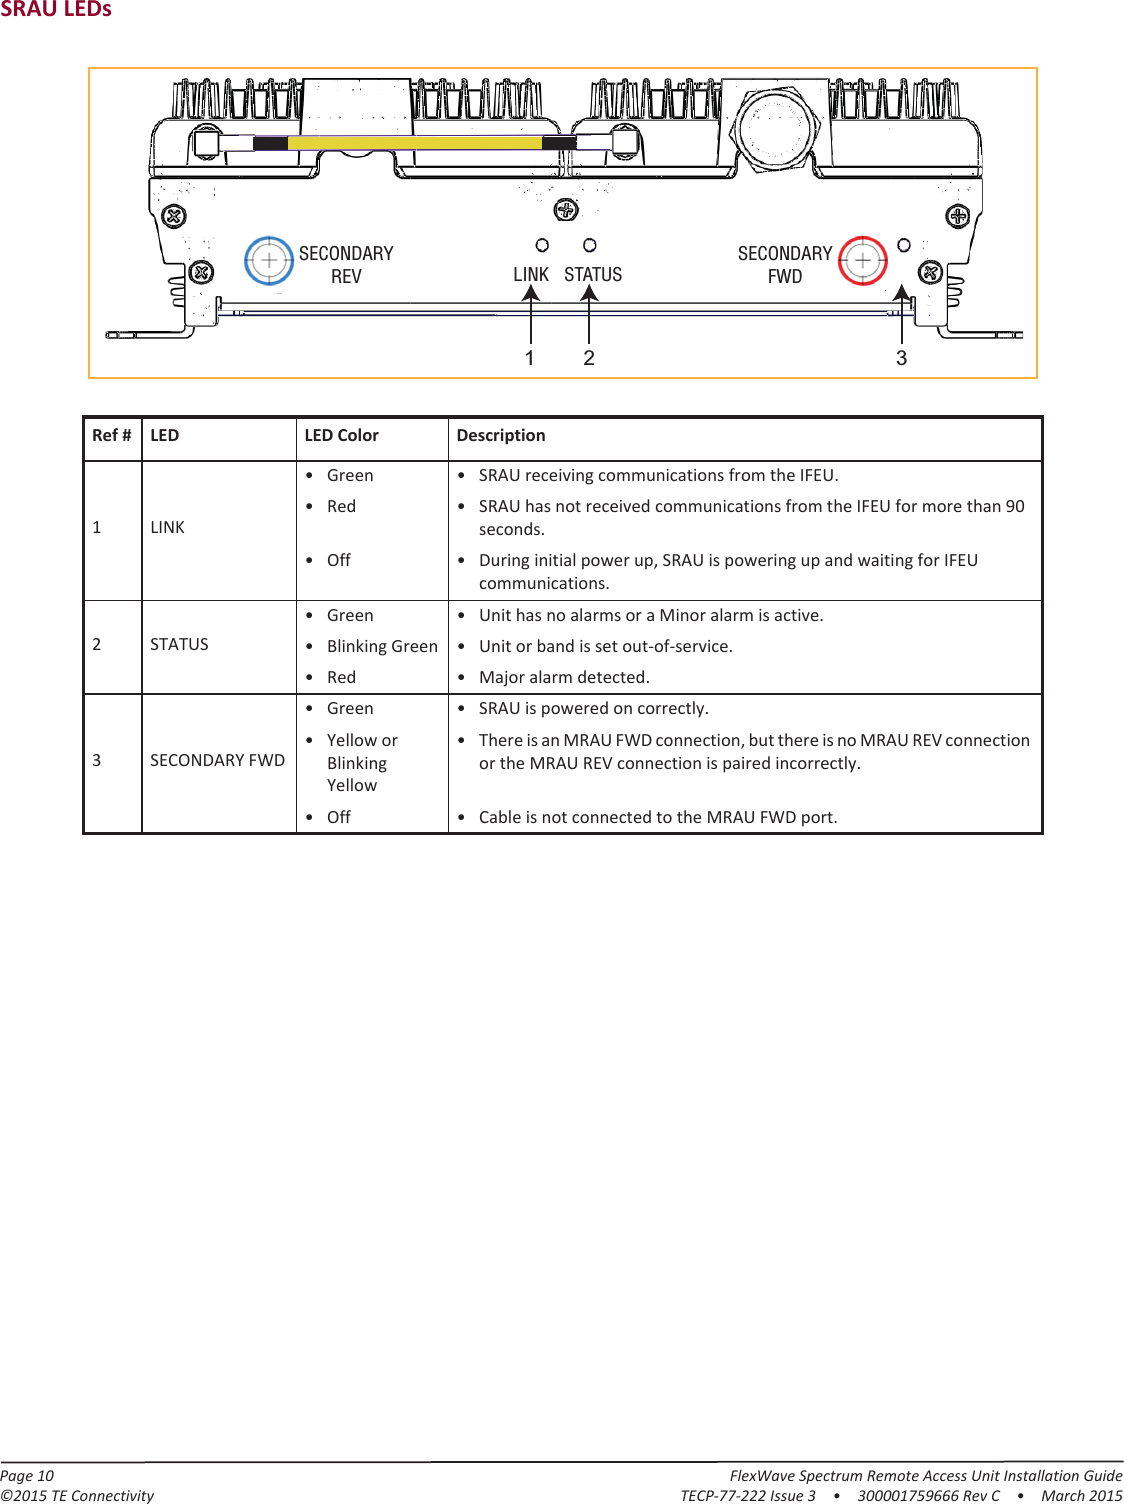 Page 10 FlexWave Spectrum Remote Access Unit Installation Guide©2015 TE Connectivity TECP-77-222 Issue 3  •  300001759666 Rev C  • March 2015SRAU LEDsLINK STATUSSECONDARYREVSECONDARYFWDSECONDARYREVSECONDARYFWDLINK STATUS312Ref # LED LED Color Description1 LINK2 STATUS3 SECONDARY FWD• Green • SRAU receiving communications from the IFEU.•Red • SRAU has not received communications from the IFEU for more than 90 seconds.• Off • During initial power up, SRAU is powering up and waiting for IFEU communications.• Green • Unit has no alarms or a Minor alarm is active.•Blinking Green • Unit or band is set out-of-service.• Red • Major alarm detected.• Green • SRAU is powered on correctly.•Yellow or Blinking Yellow• There is an MRAU FWD connection, but there is no MRAU REV connection or the MRAU REV connection is paired incorrectly.• Off • Cable is not connected to the MRAU FWD port.